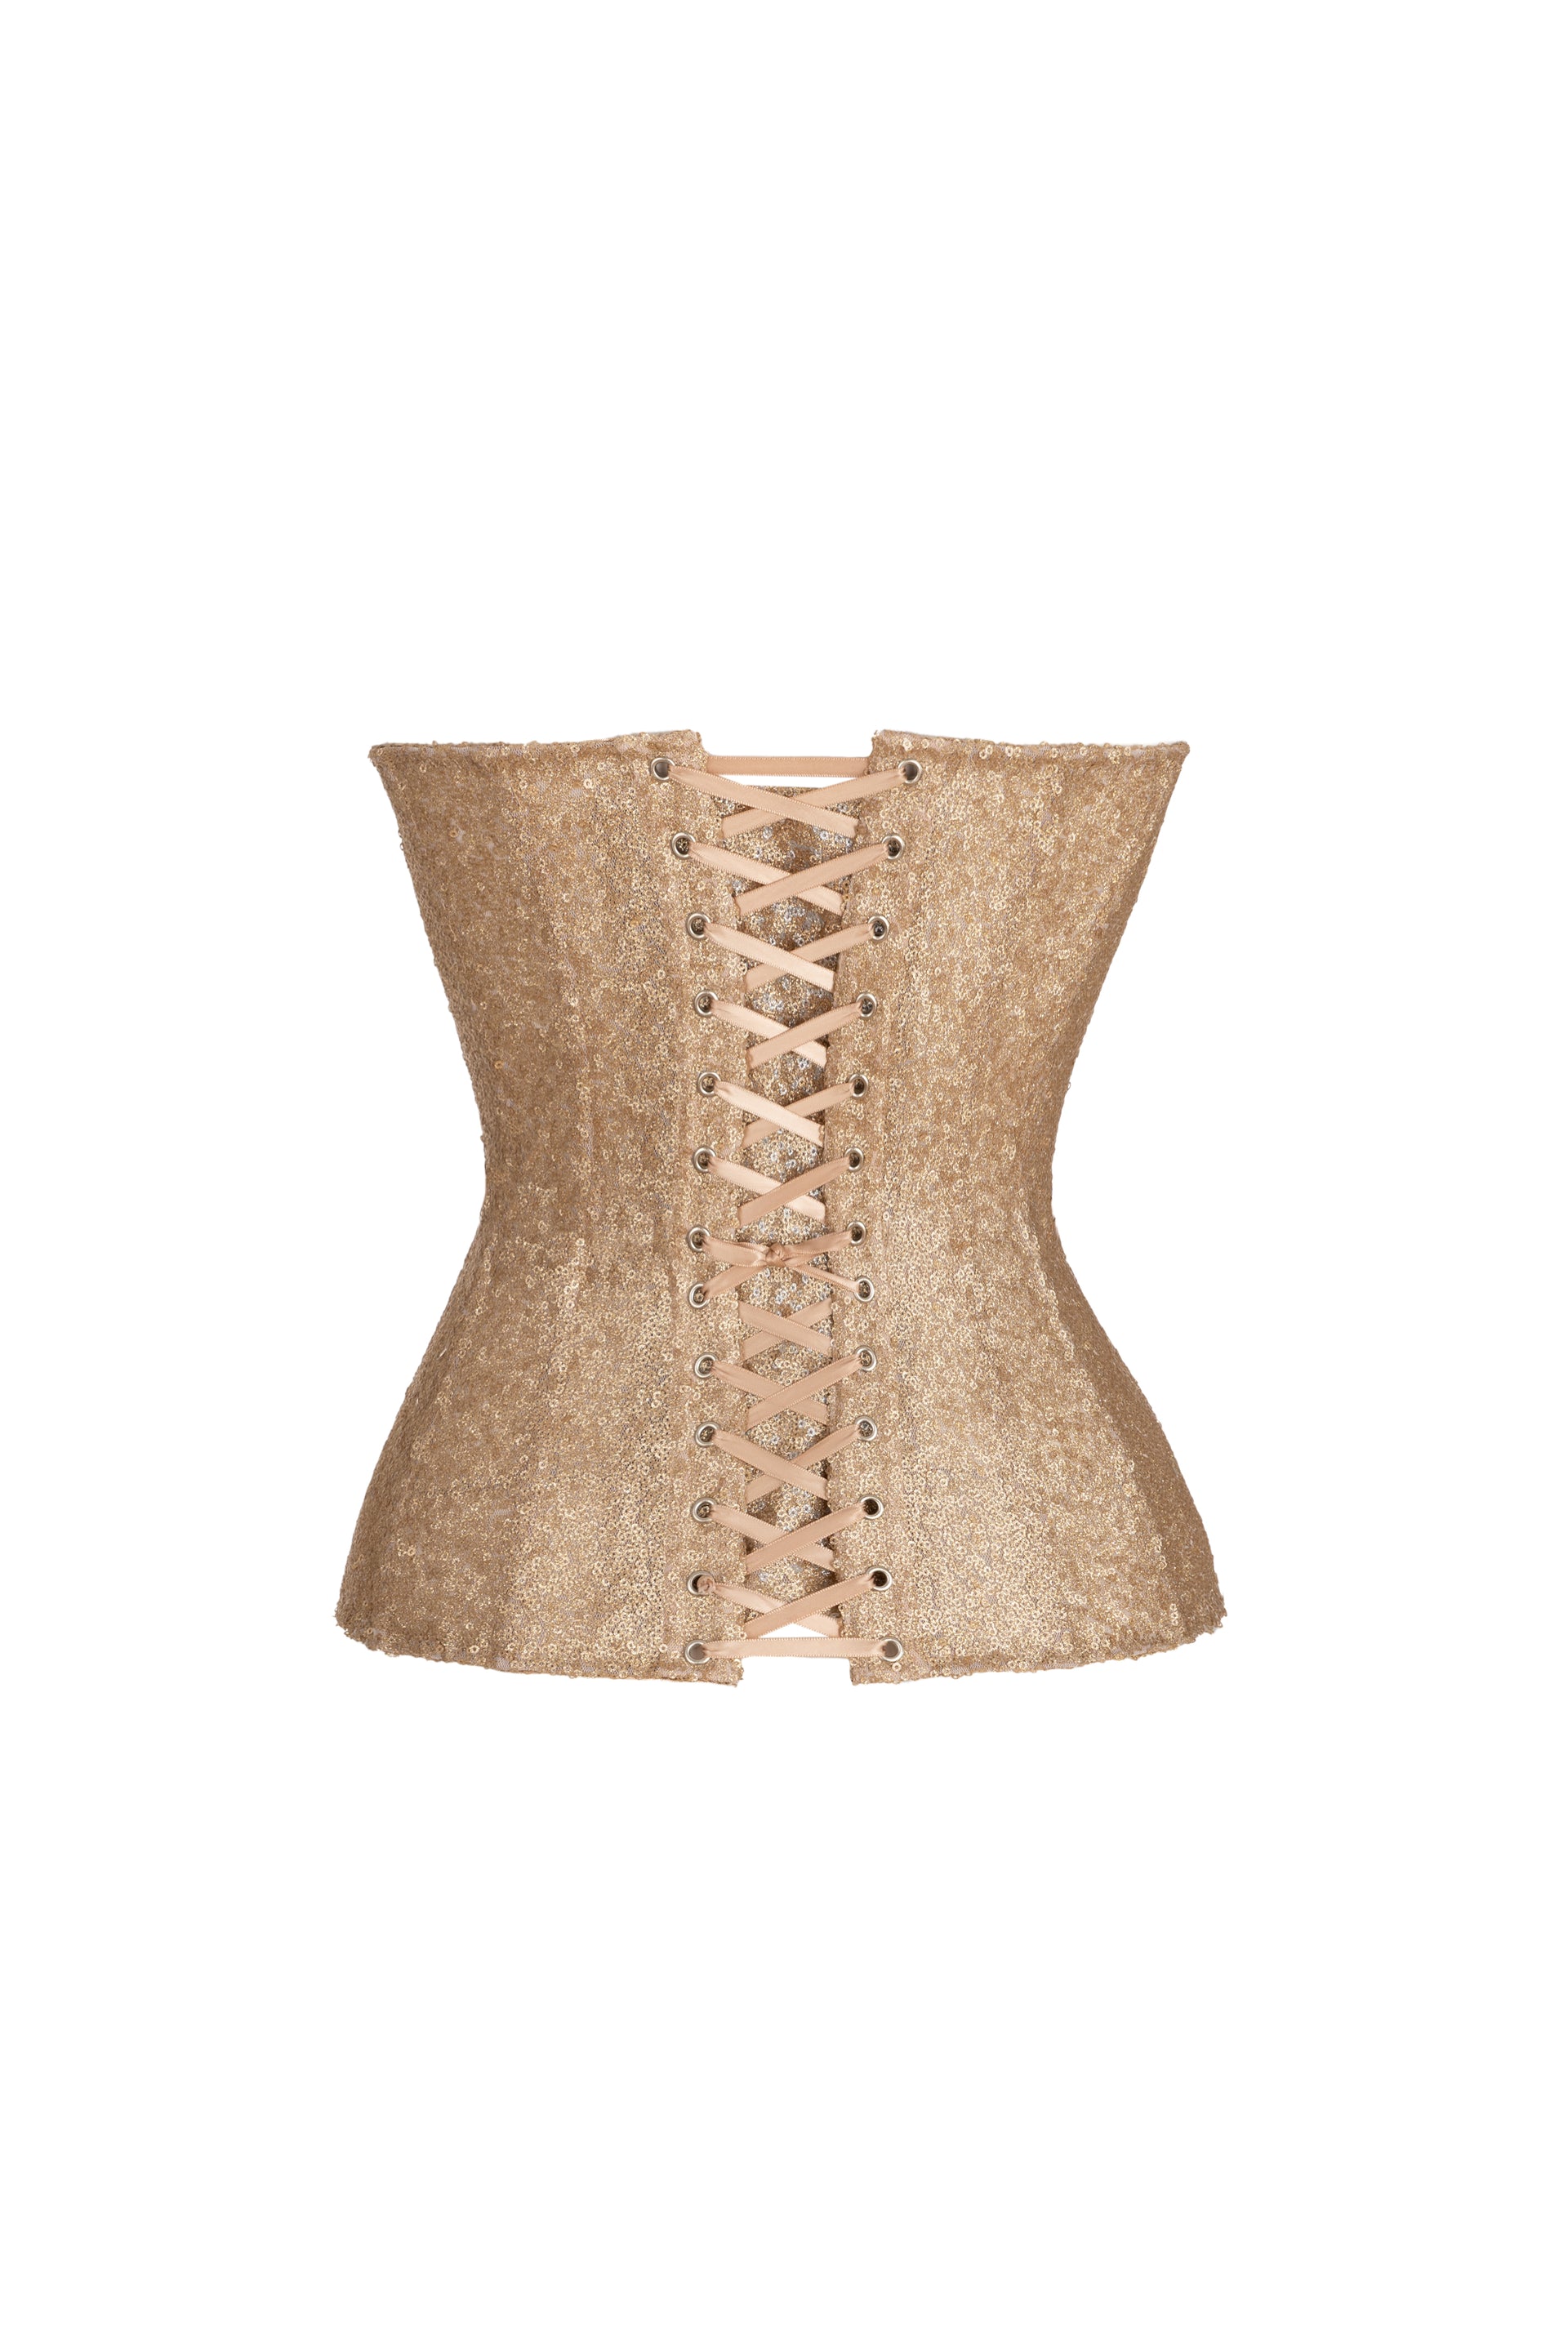 Gold sequined corset with cups